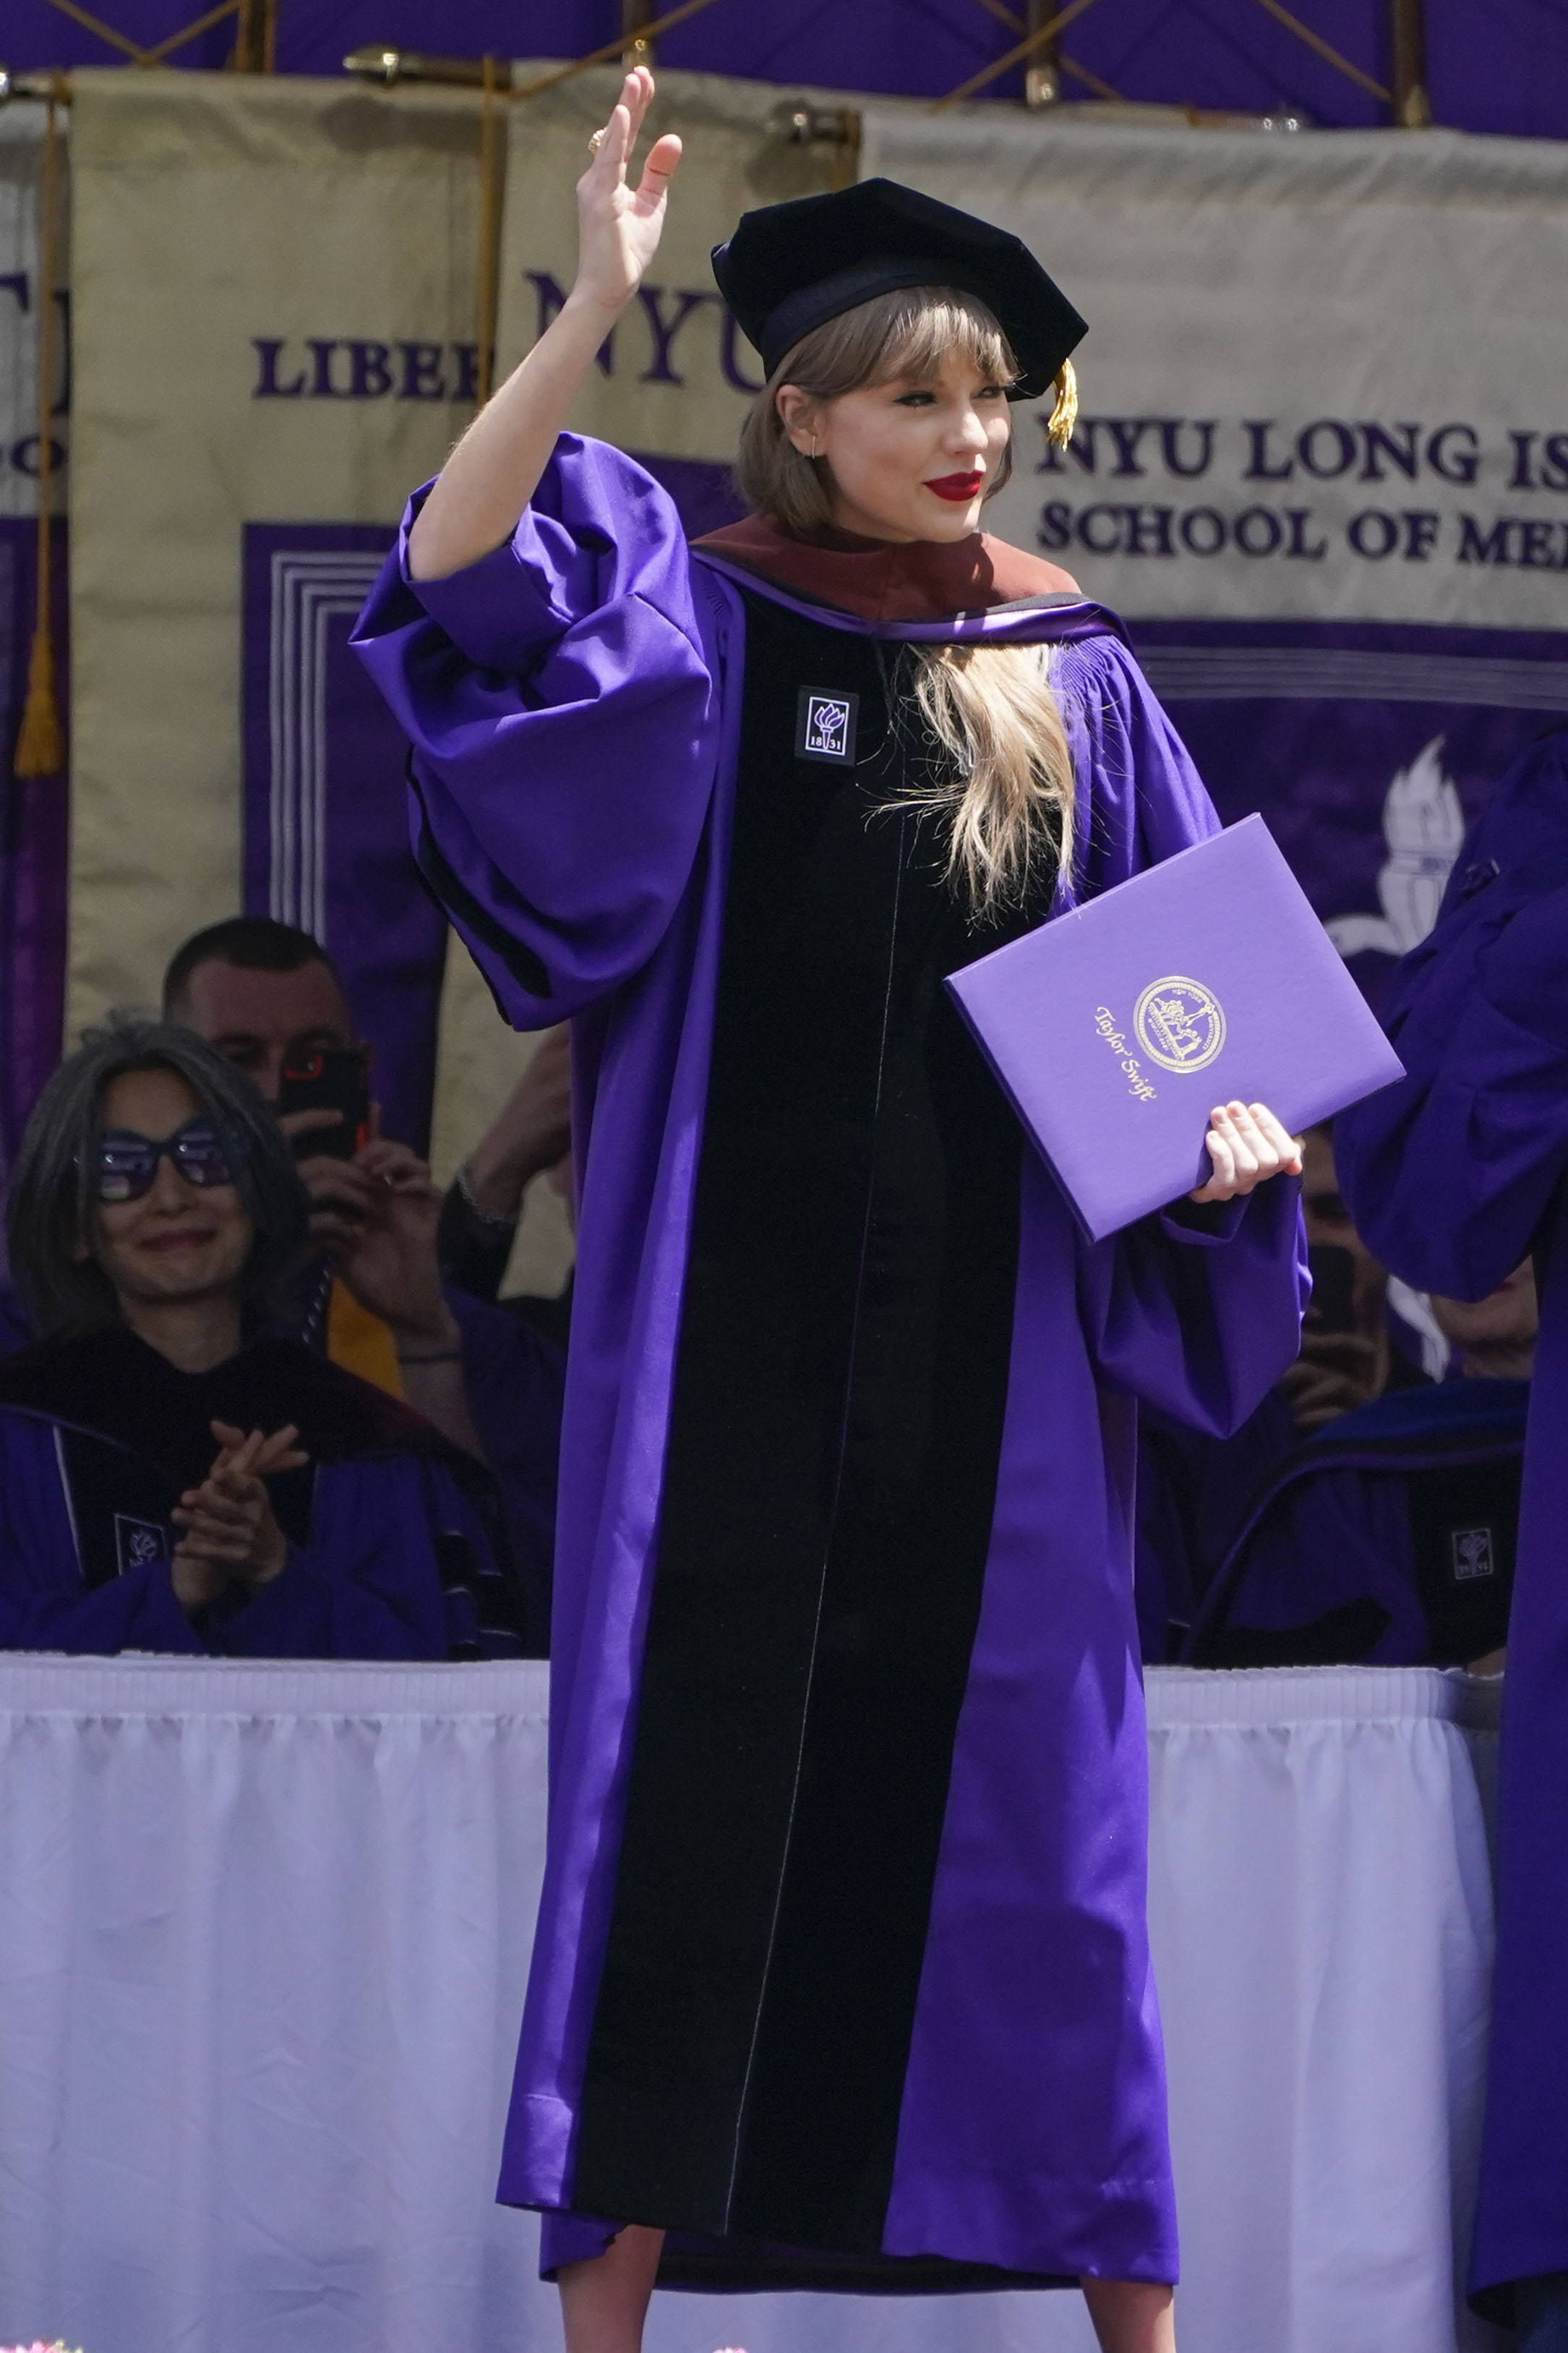 Taylor Swift Degree, College, Doctorate: Her Education Details | J-14